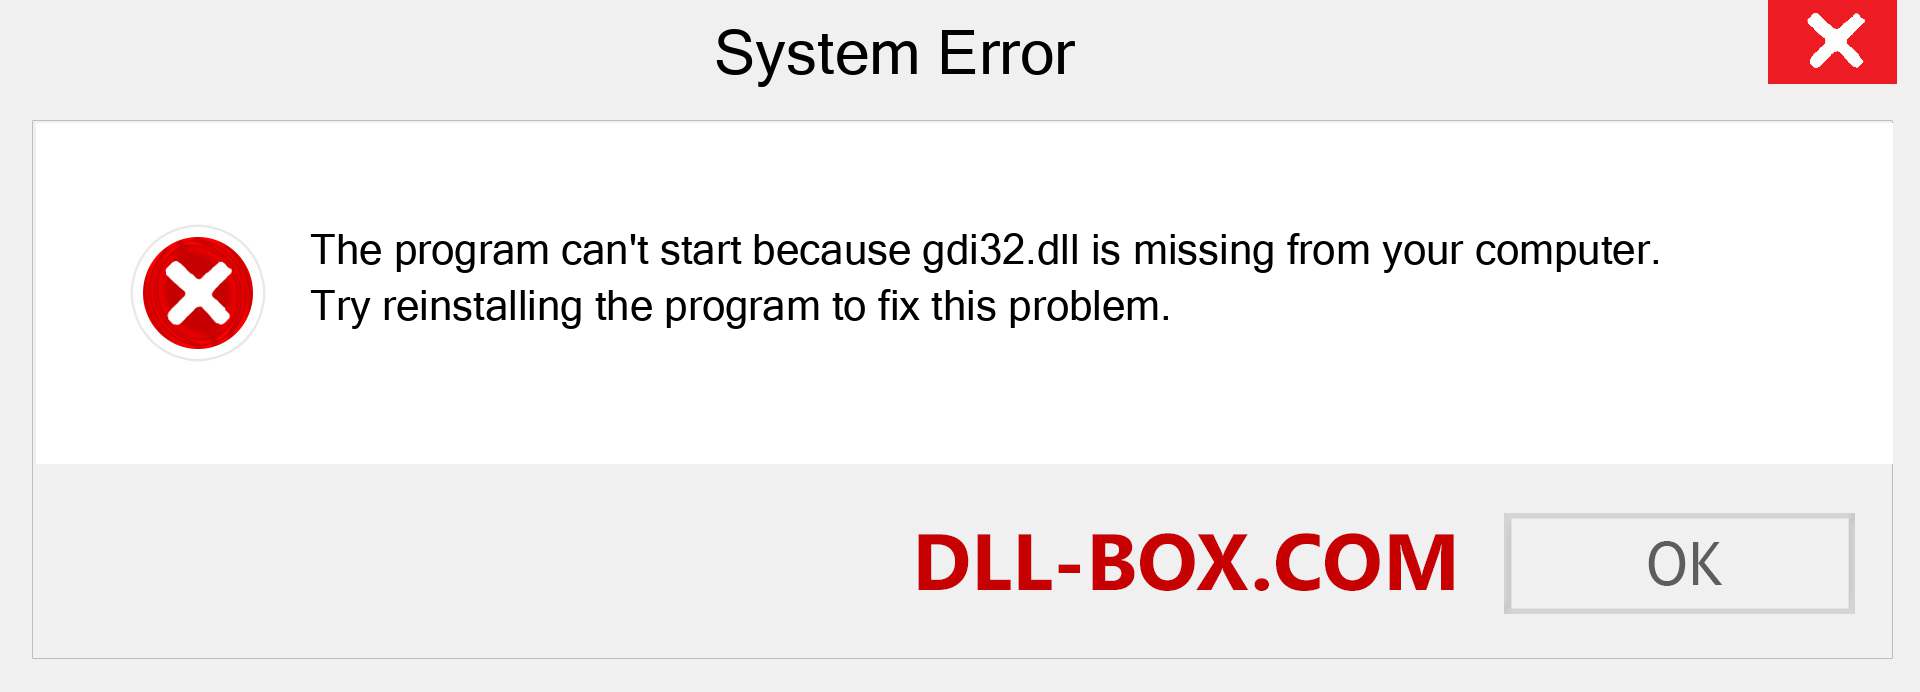  gdi32.dll file is missing?. Download for Windows 7, 8, 10 - Fix  gdi32 dll Missing Error on Windows, photos, images